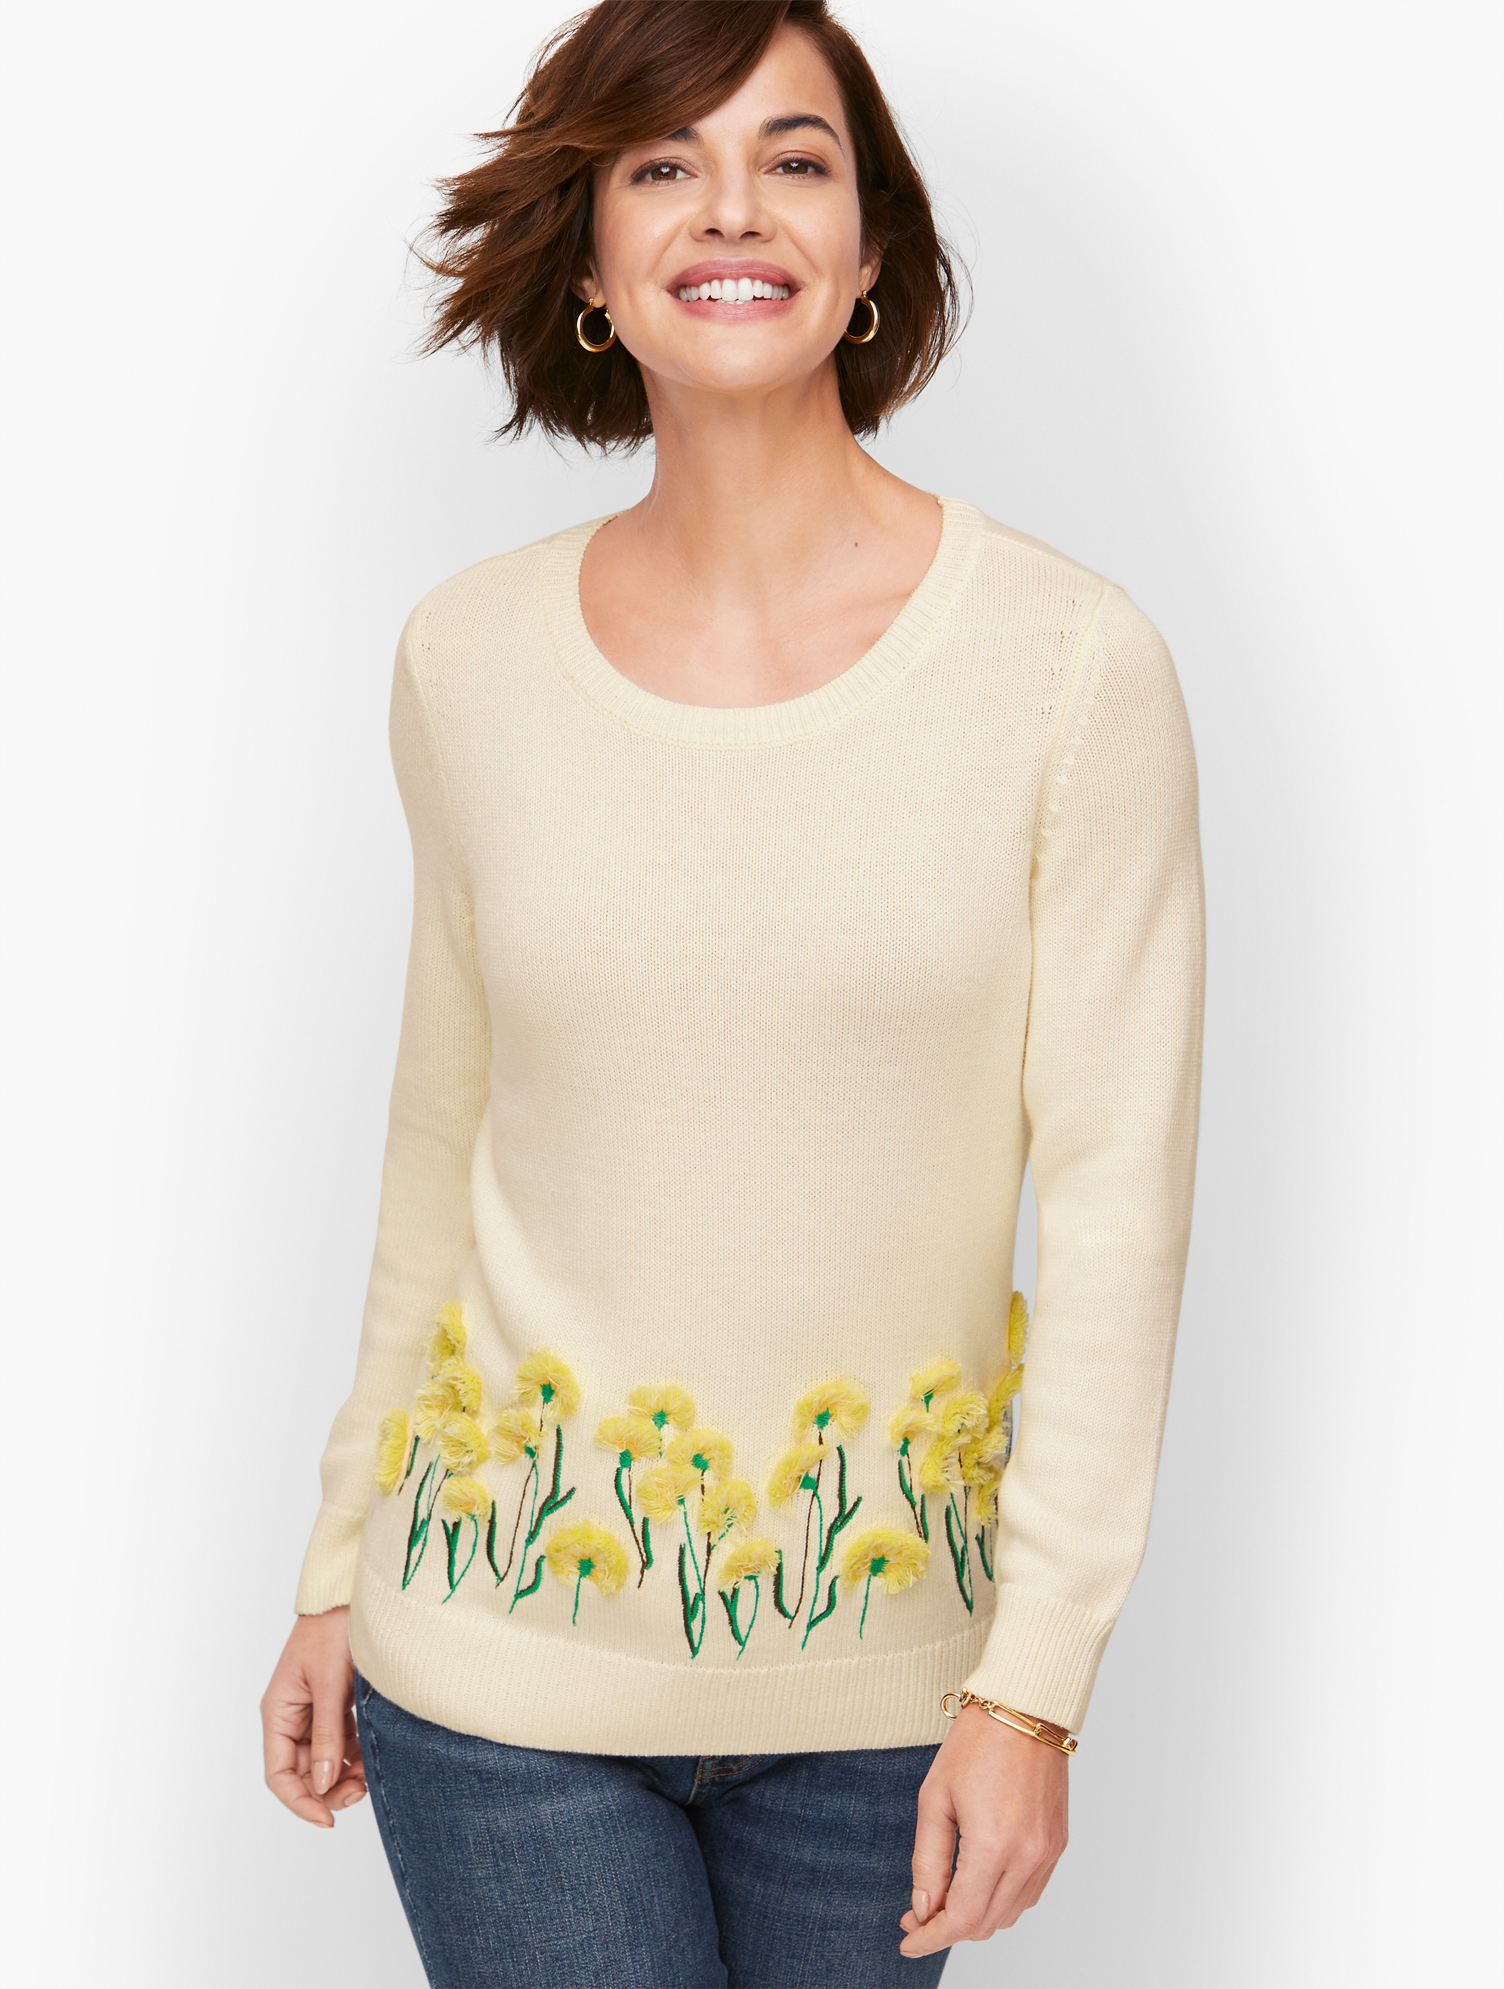 Talbots Floral Embroidered Open Neck Sweater - Ivory - Large